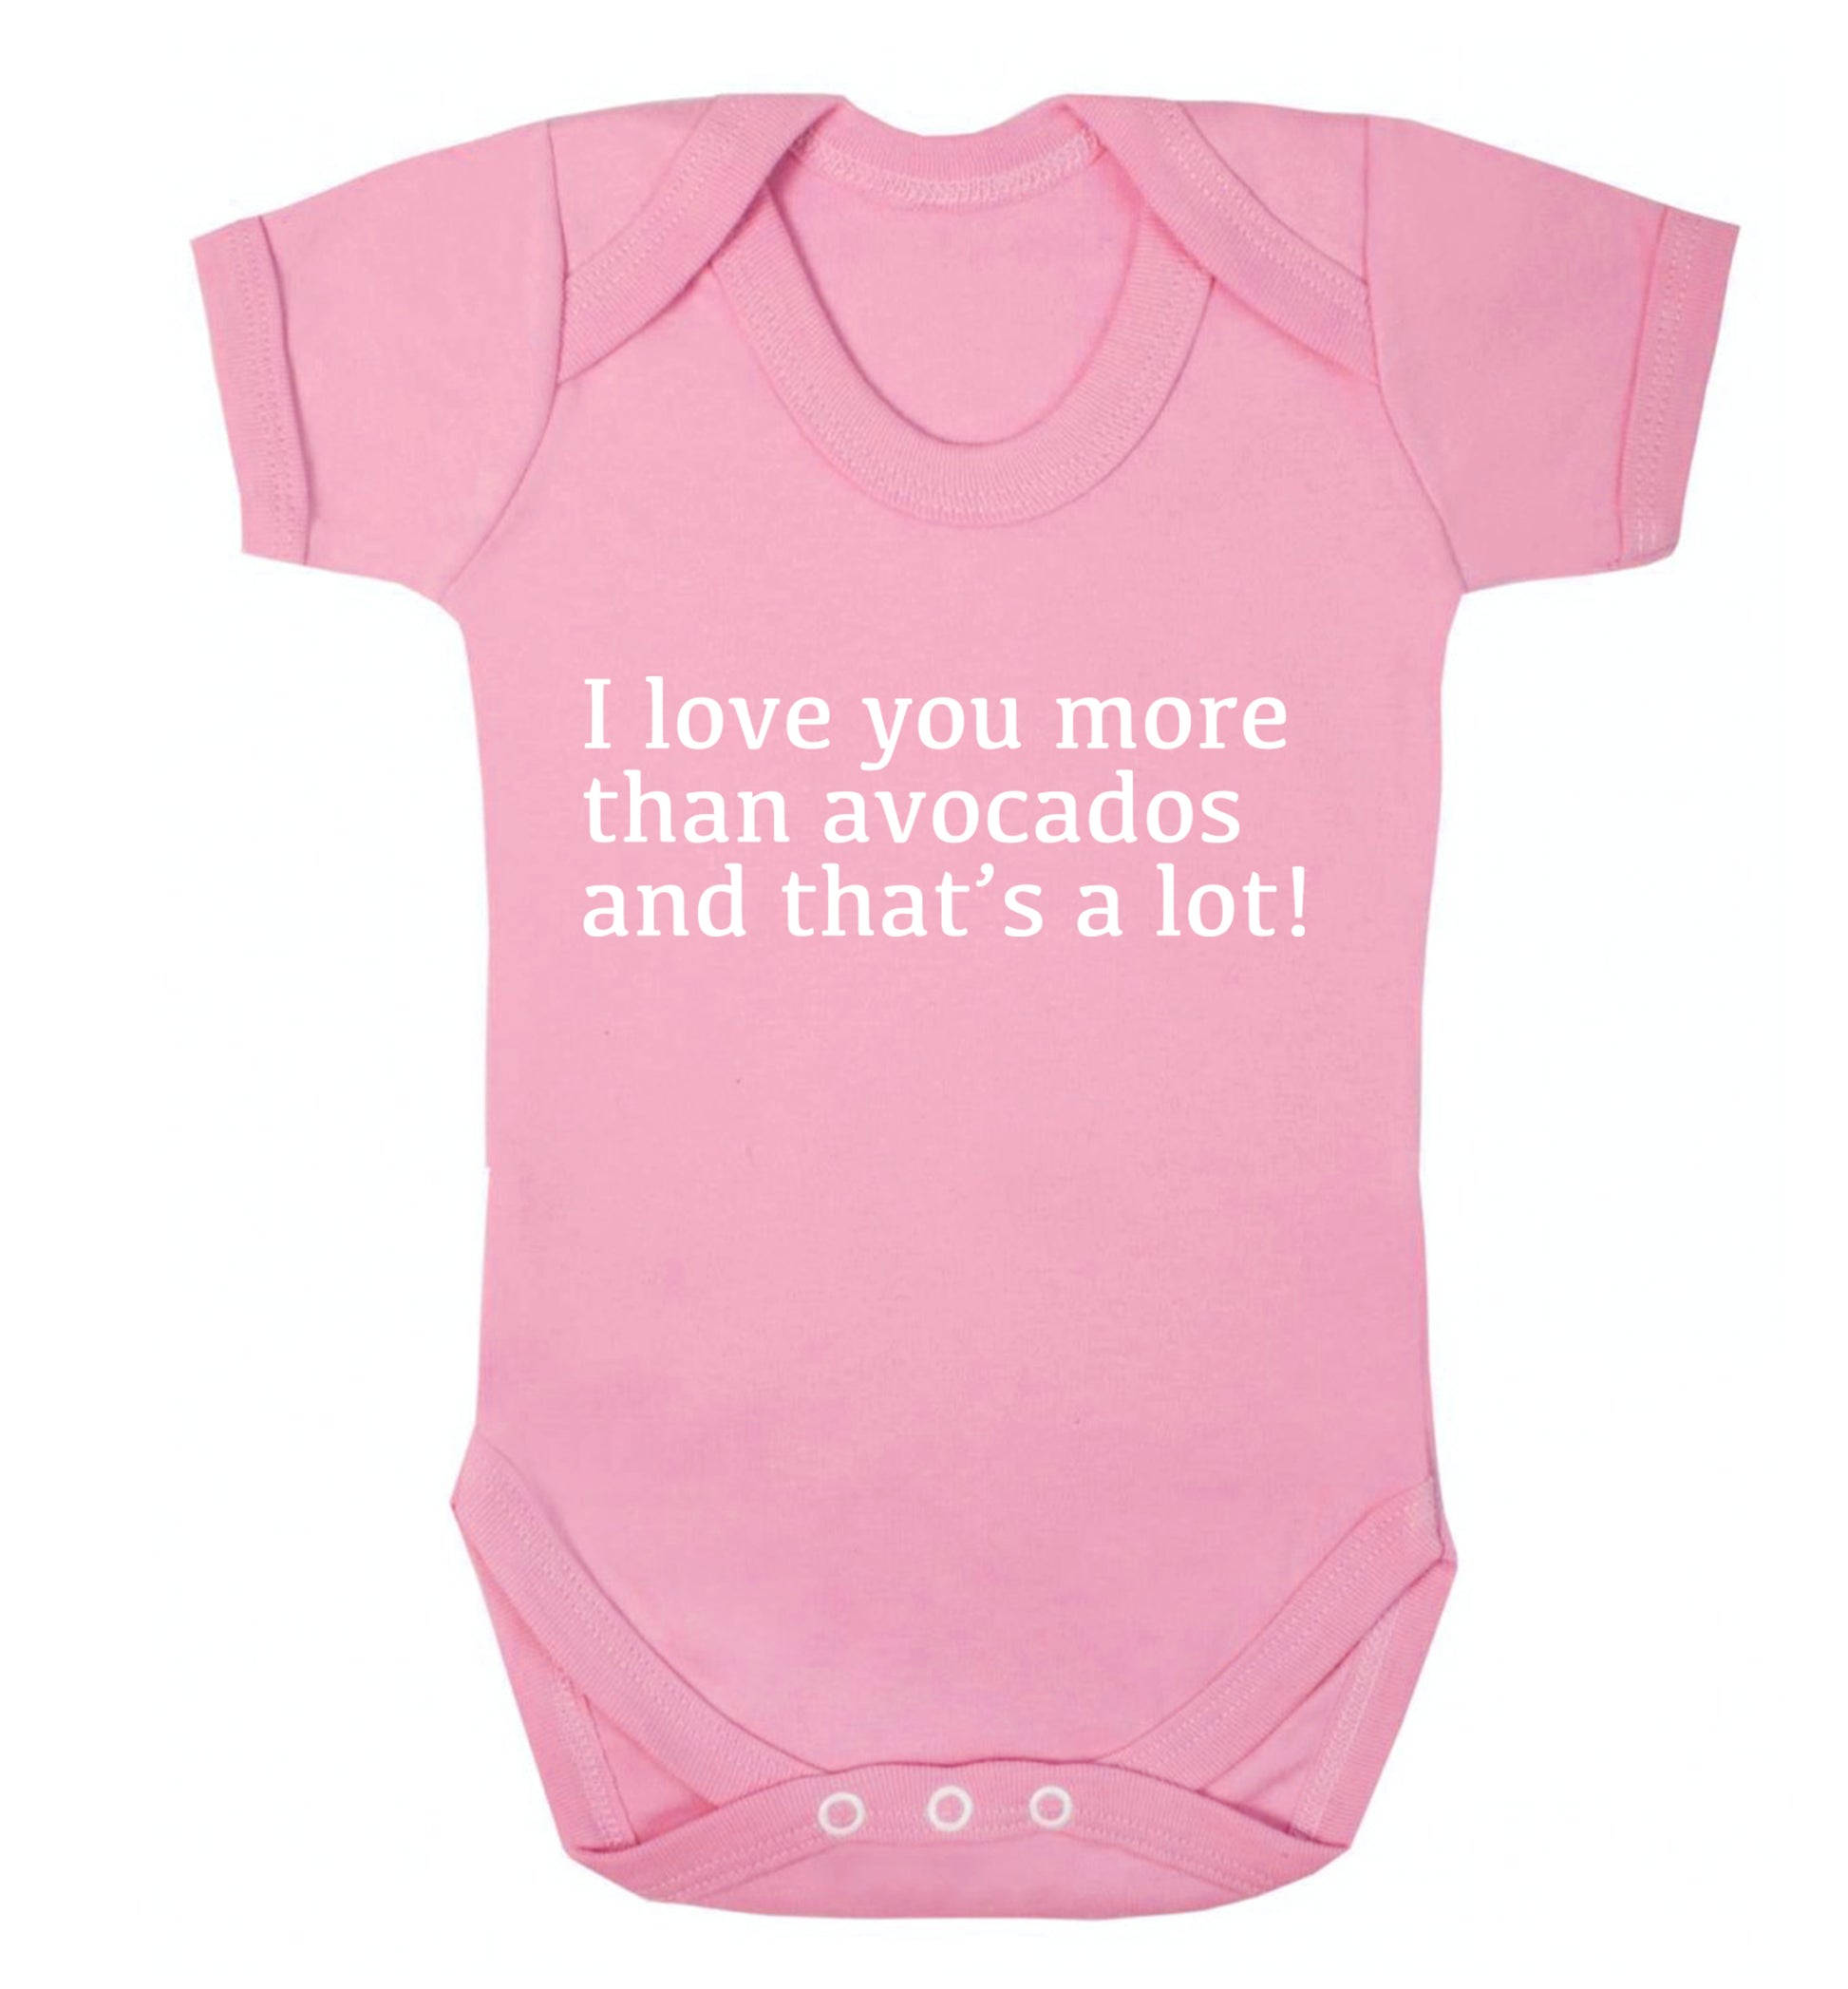 I love you more than avocados and that's a lot Baby Vest pale pink 18-24 months